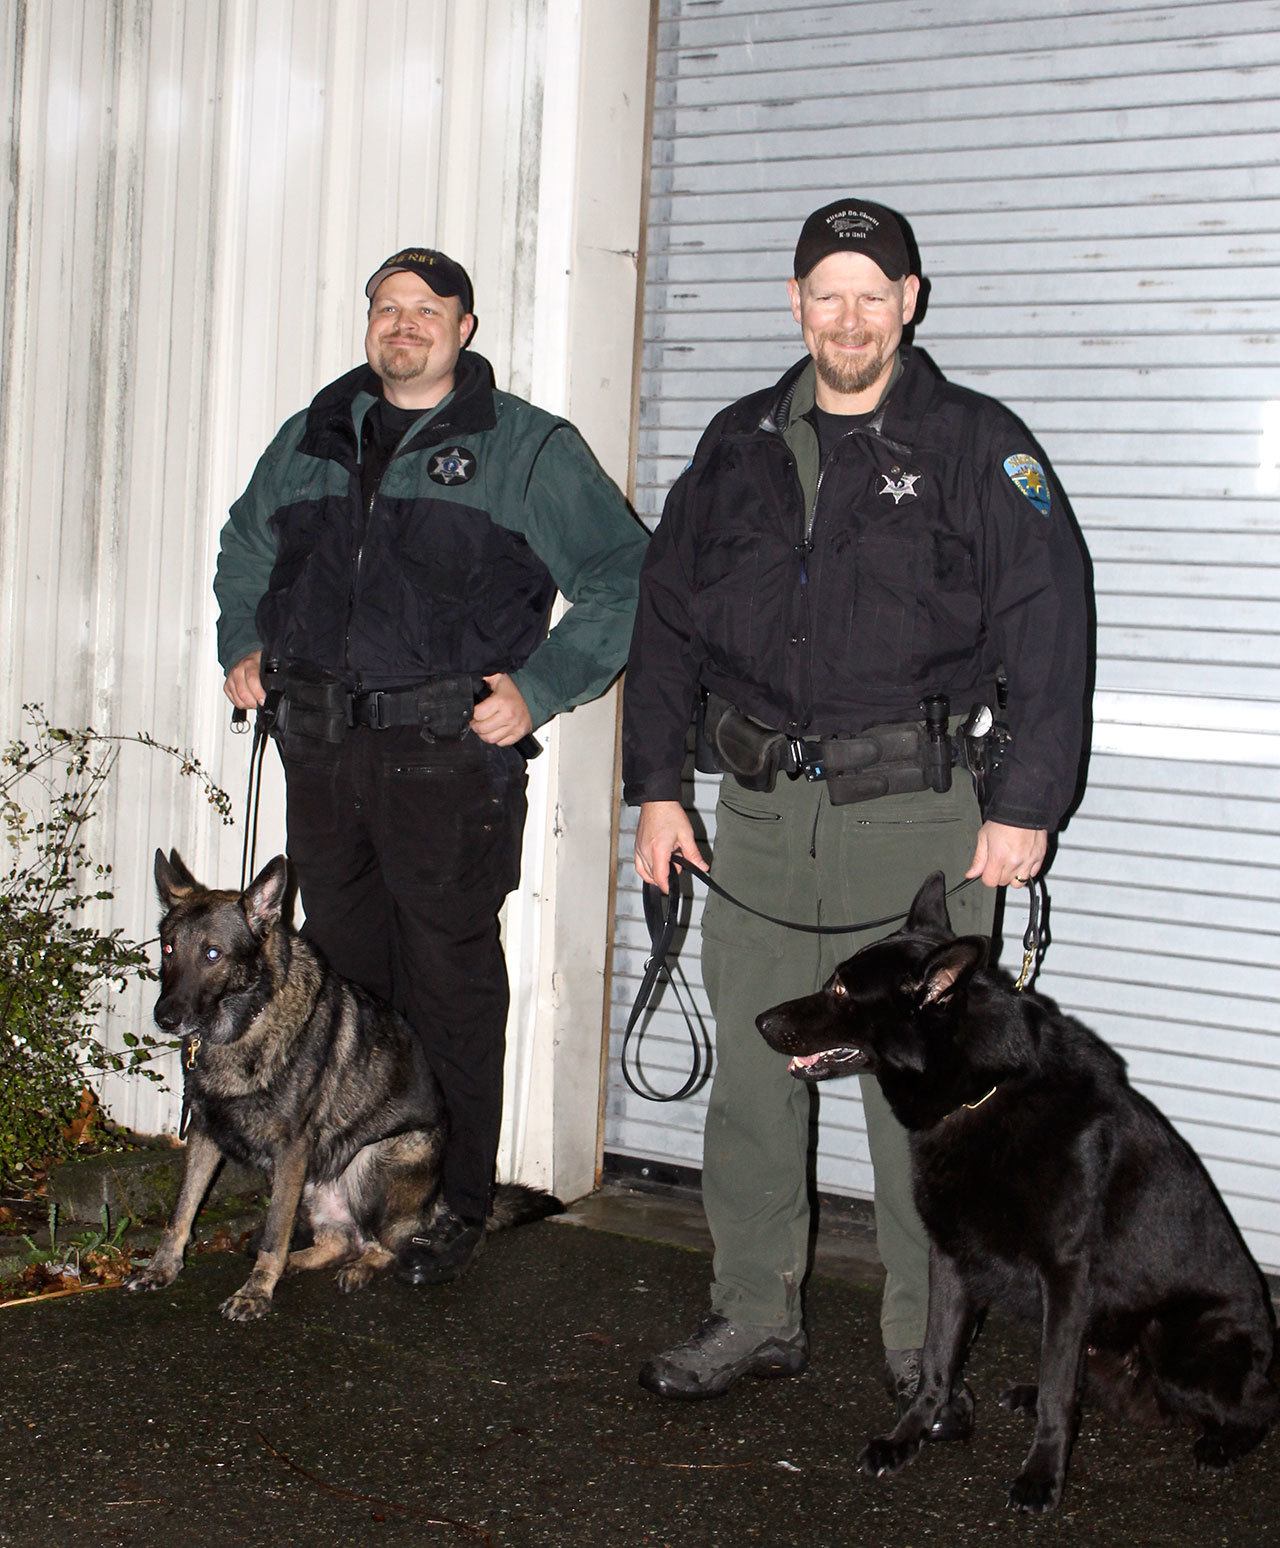 Grays Harbor Sheriff’s Deputy Tracy Gay, left, with his K-9 partner Max, and Kitsap County Sheriff’s Deputy Aaron Baker, right, with his K-9 partner Heiko, take a break from training on Nov. 15 at the Kitsap County Fairgrounds.                                Michelle Beahm / Kitsap News Group